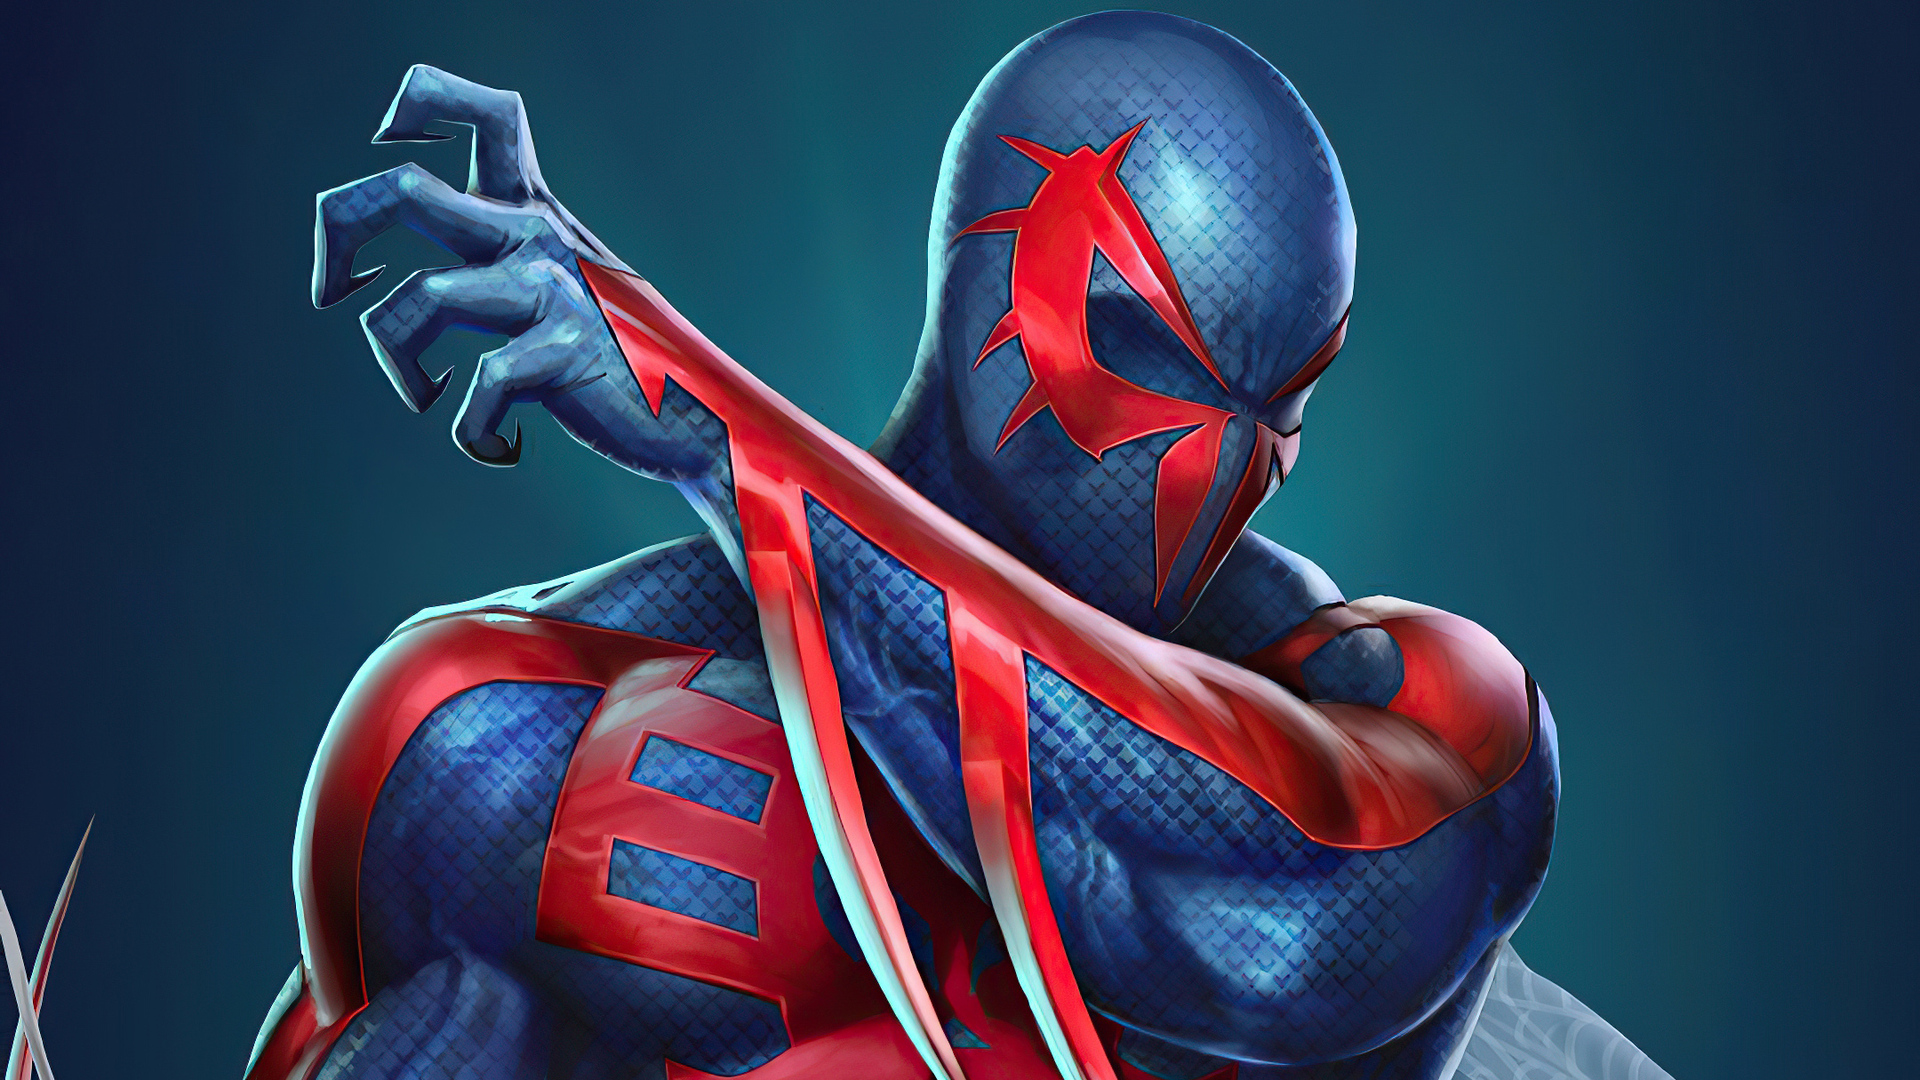 X spider man art laptop full hd p hd k wallpapers images backgrounds photos and pictures